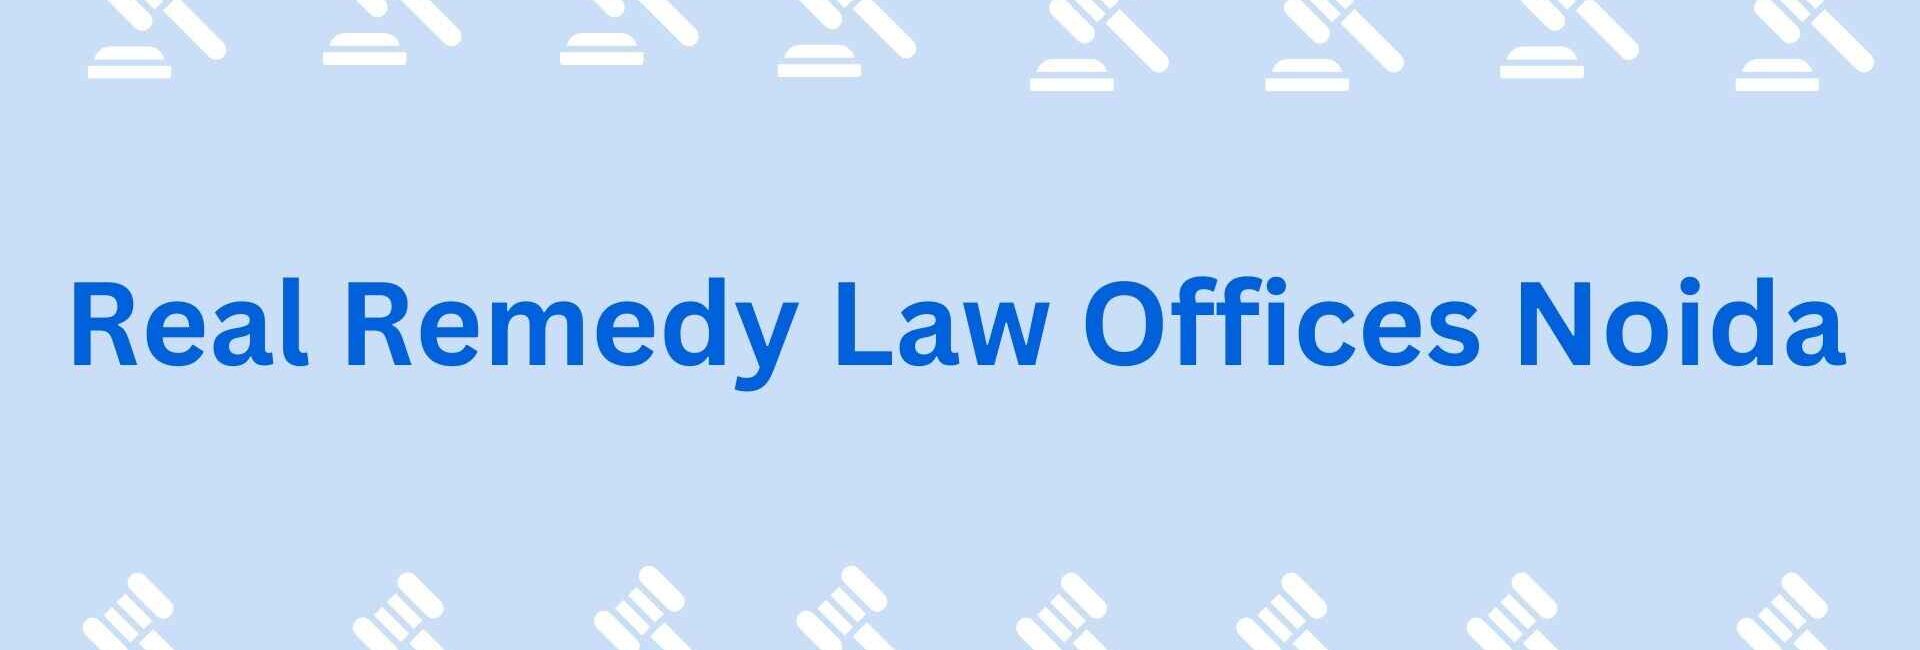 Real Remedy Law Offices Noida - Lawyer in Noida